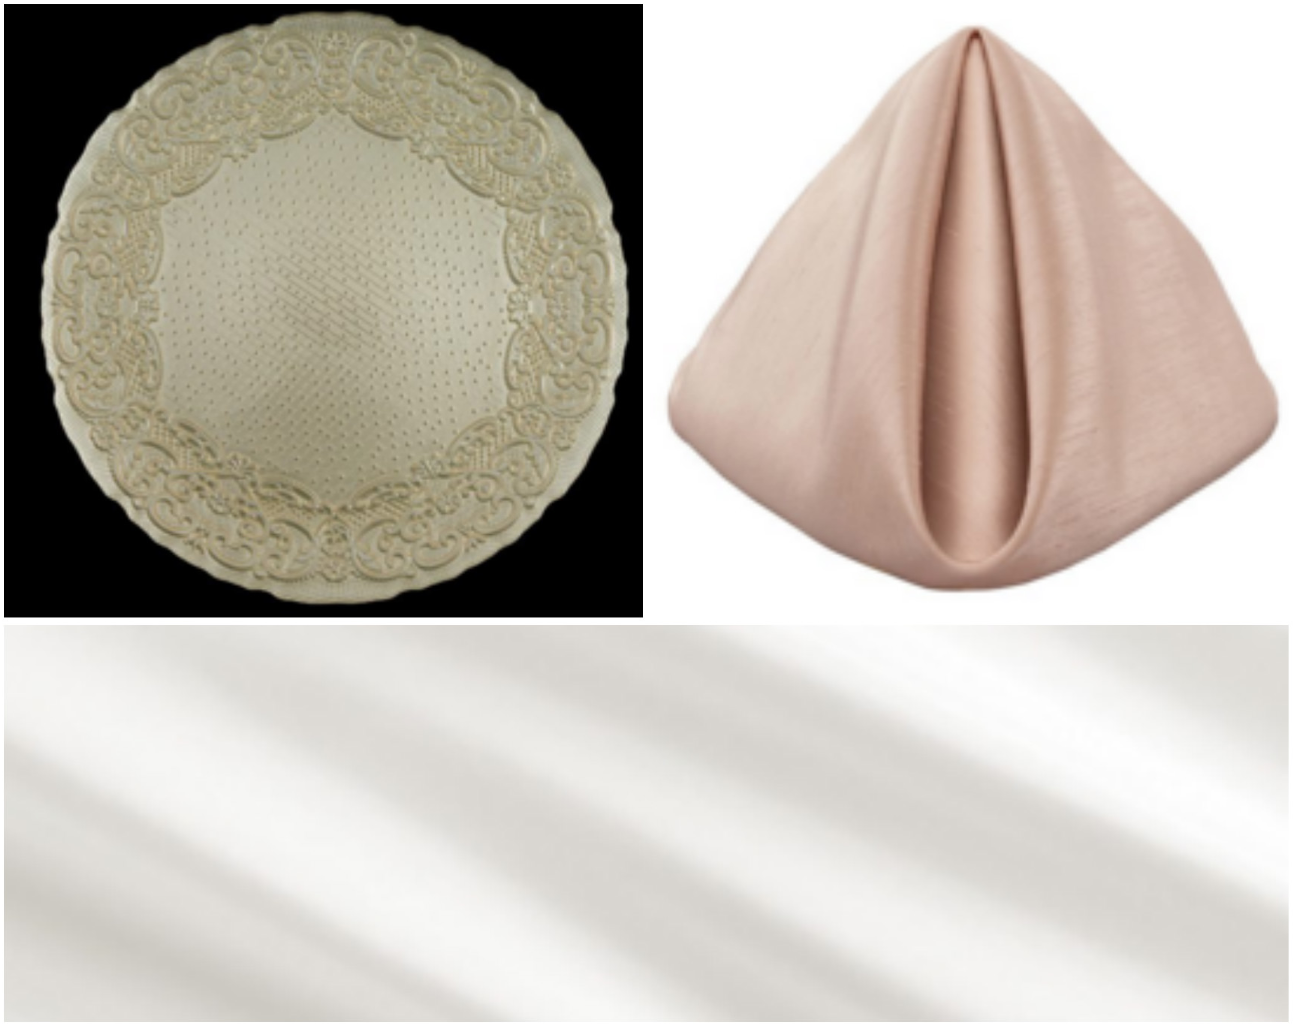 Vanilla Lace Charger Plates with Pale Pink Cameo Shantung Napkin and White Shantung Table Linen | BBJ Linen